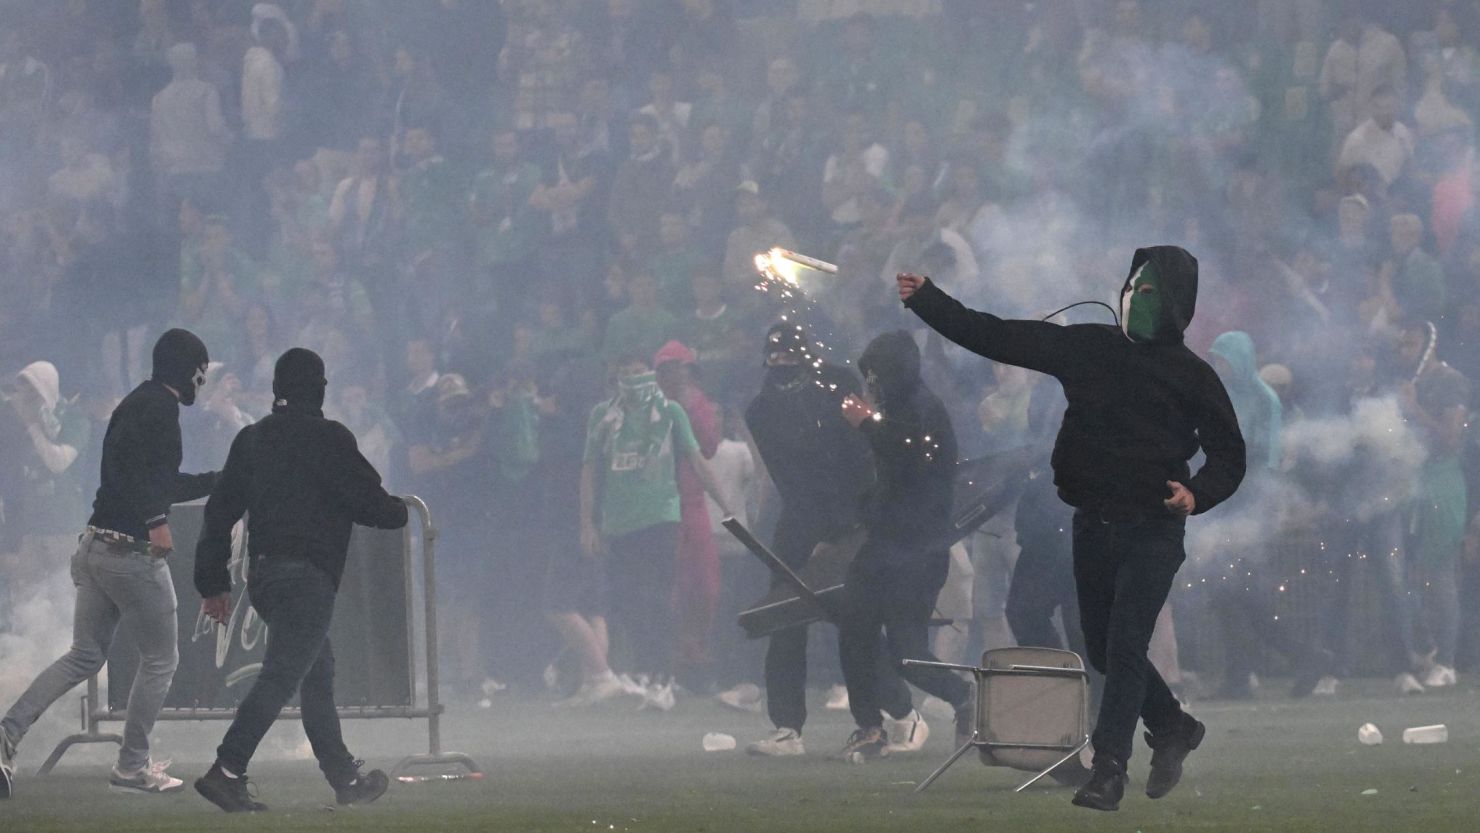 A Saint-Étienne fan throws a projectile on the pitch at the Geoffroy Guichard Stadium after the club's relegation to Ligue 2.